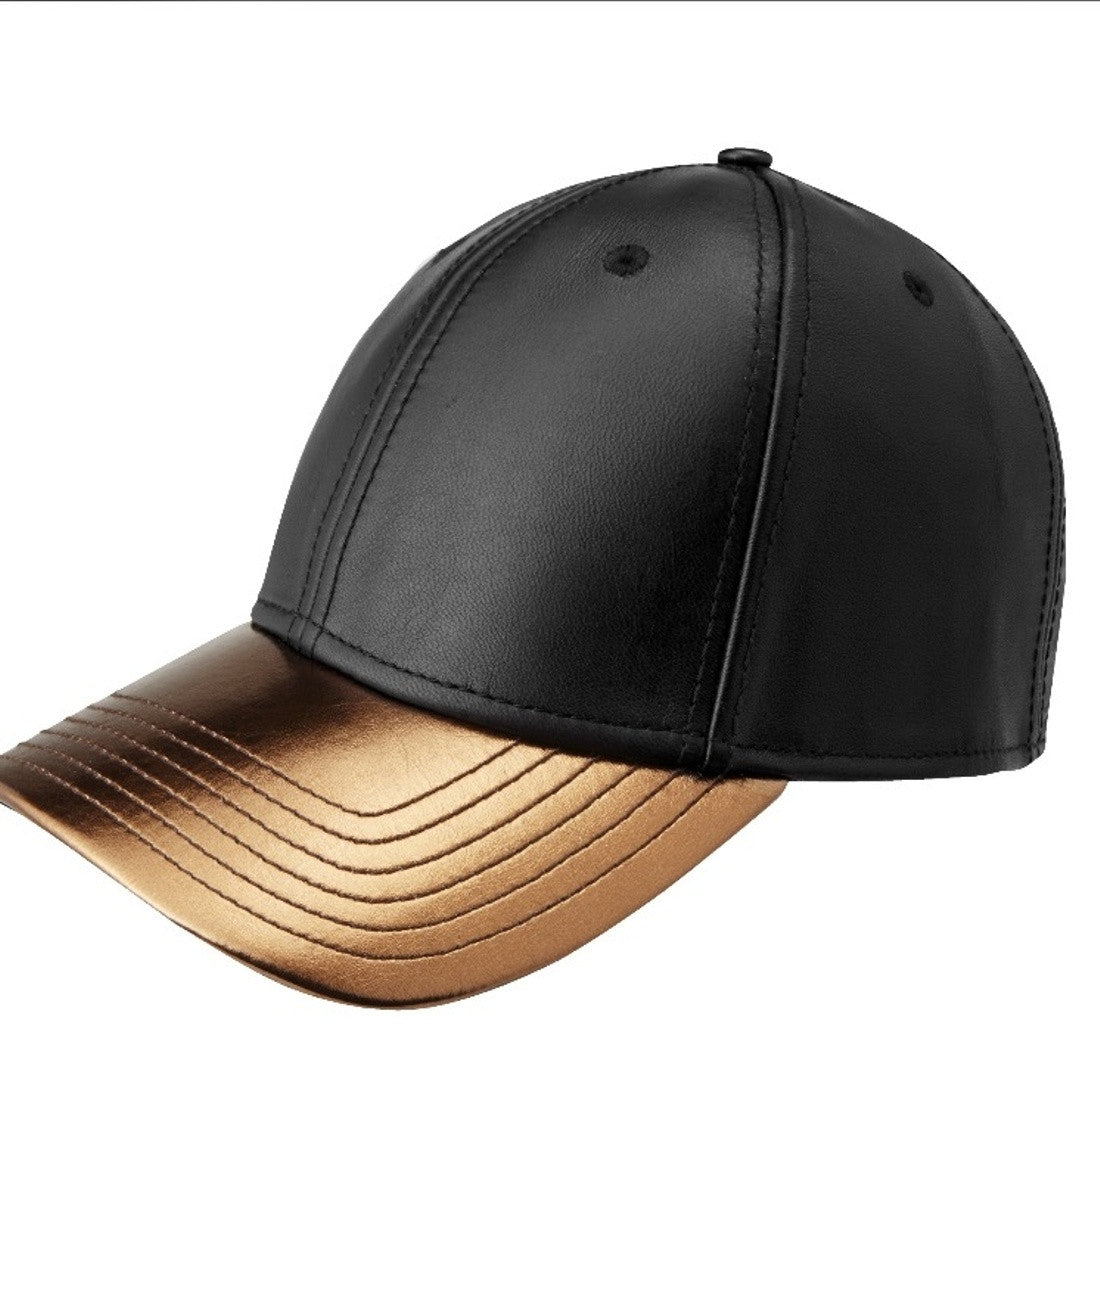 GENTS : BLACK AND GOLD LEATHER HAT - 85 86 eightyfiveightysix